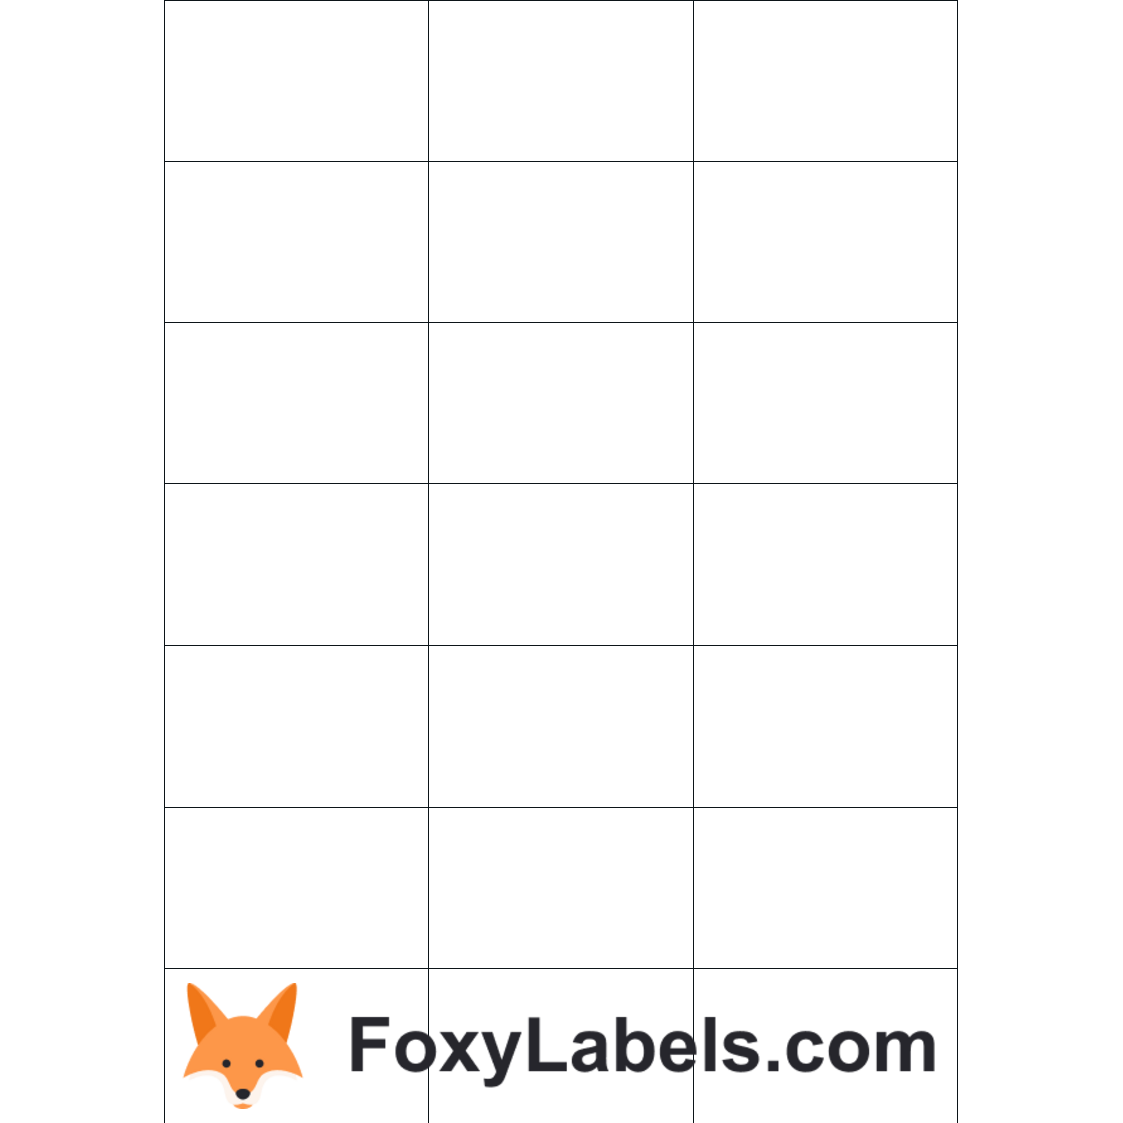 Avery® 3652 label template for Google Docs